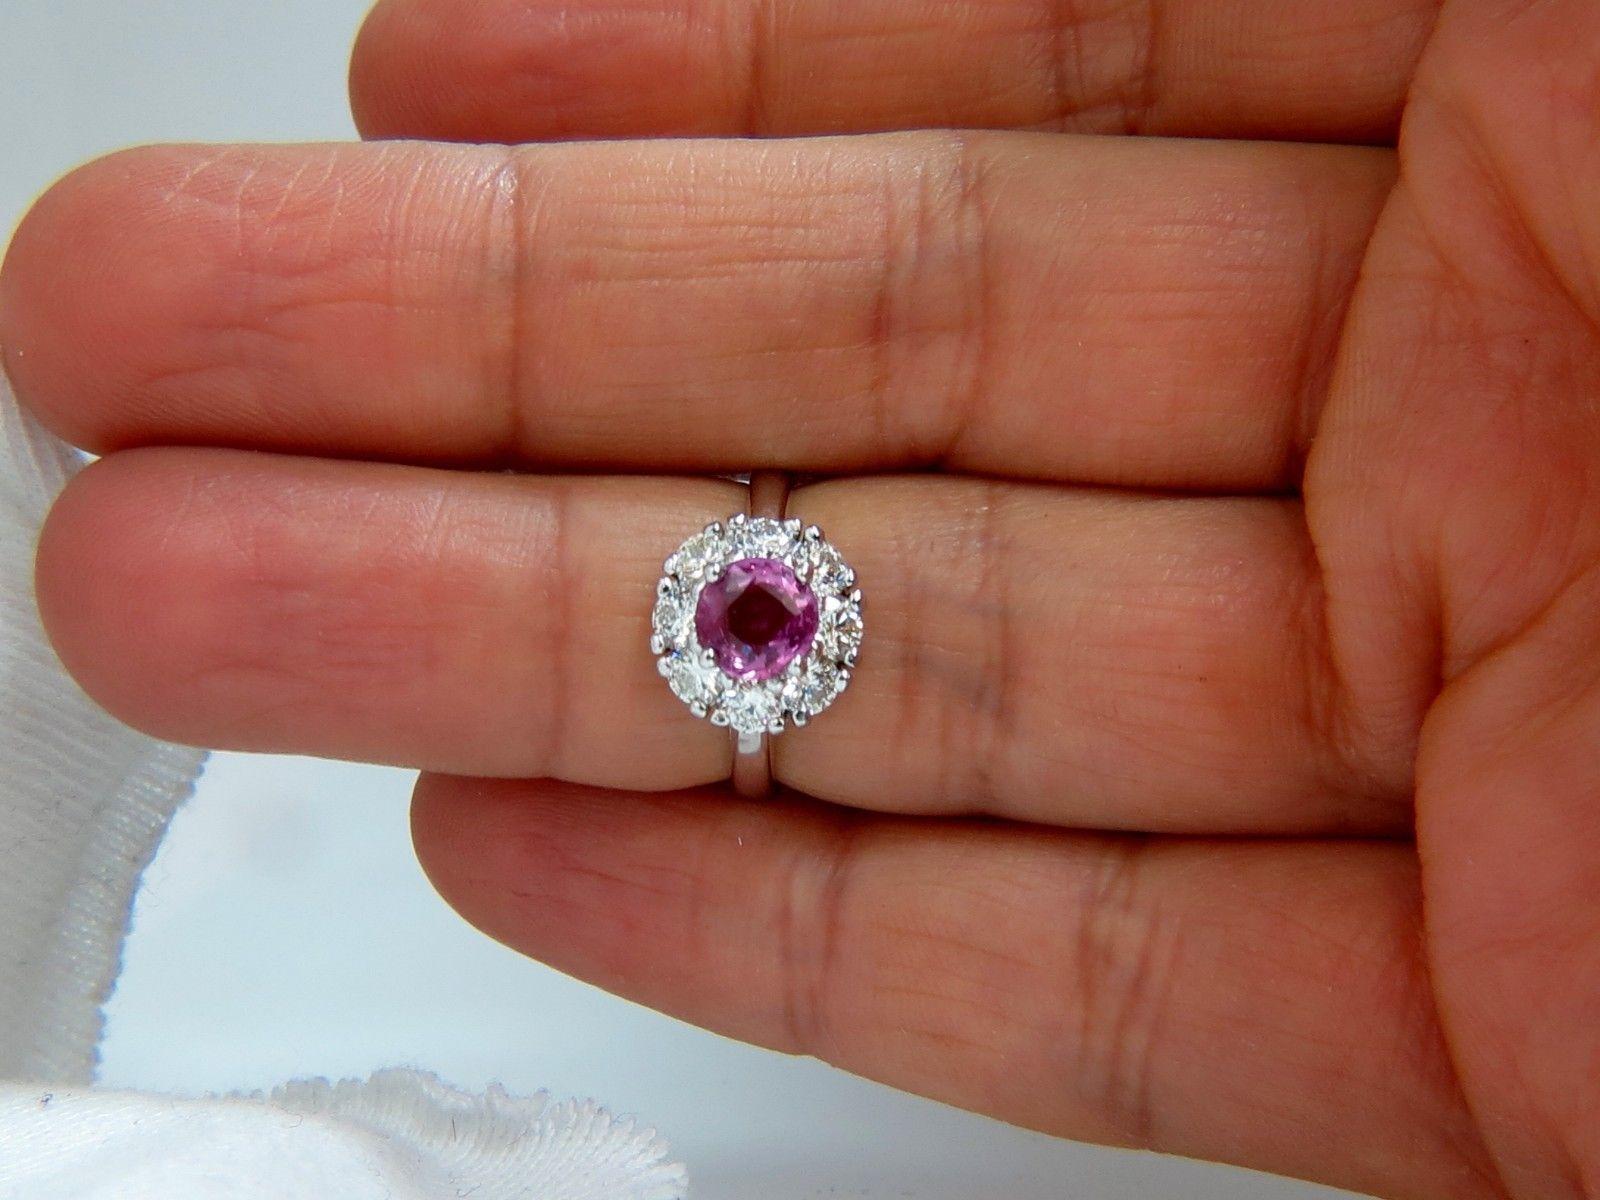 1.20ct. Natural Pink Sapphire diamonds ring.

Full cut brilliant round

 supreme Clean clarity 

Transparent and vibrant top Bright gem Gem Fancy Intense pink color

6.4mm diameter



.80ct. Diamonds 

  rounds, full cut 

F/G-color vs-2